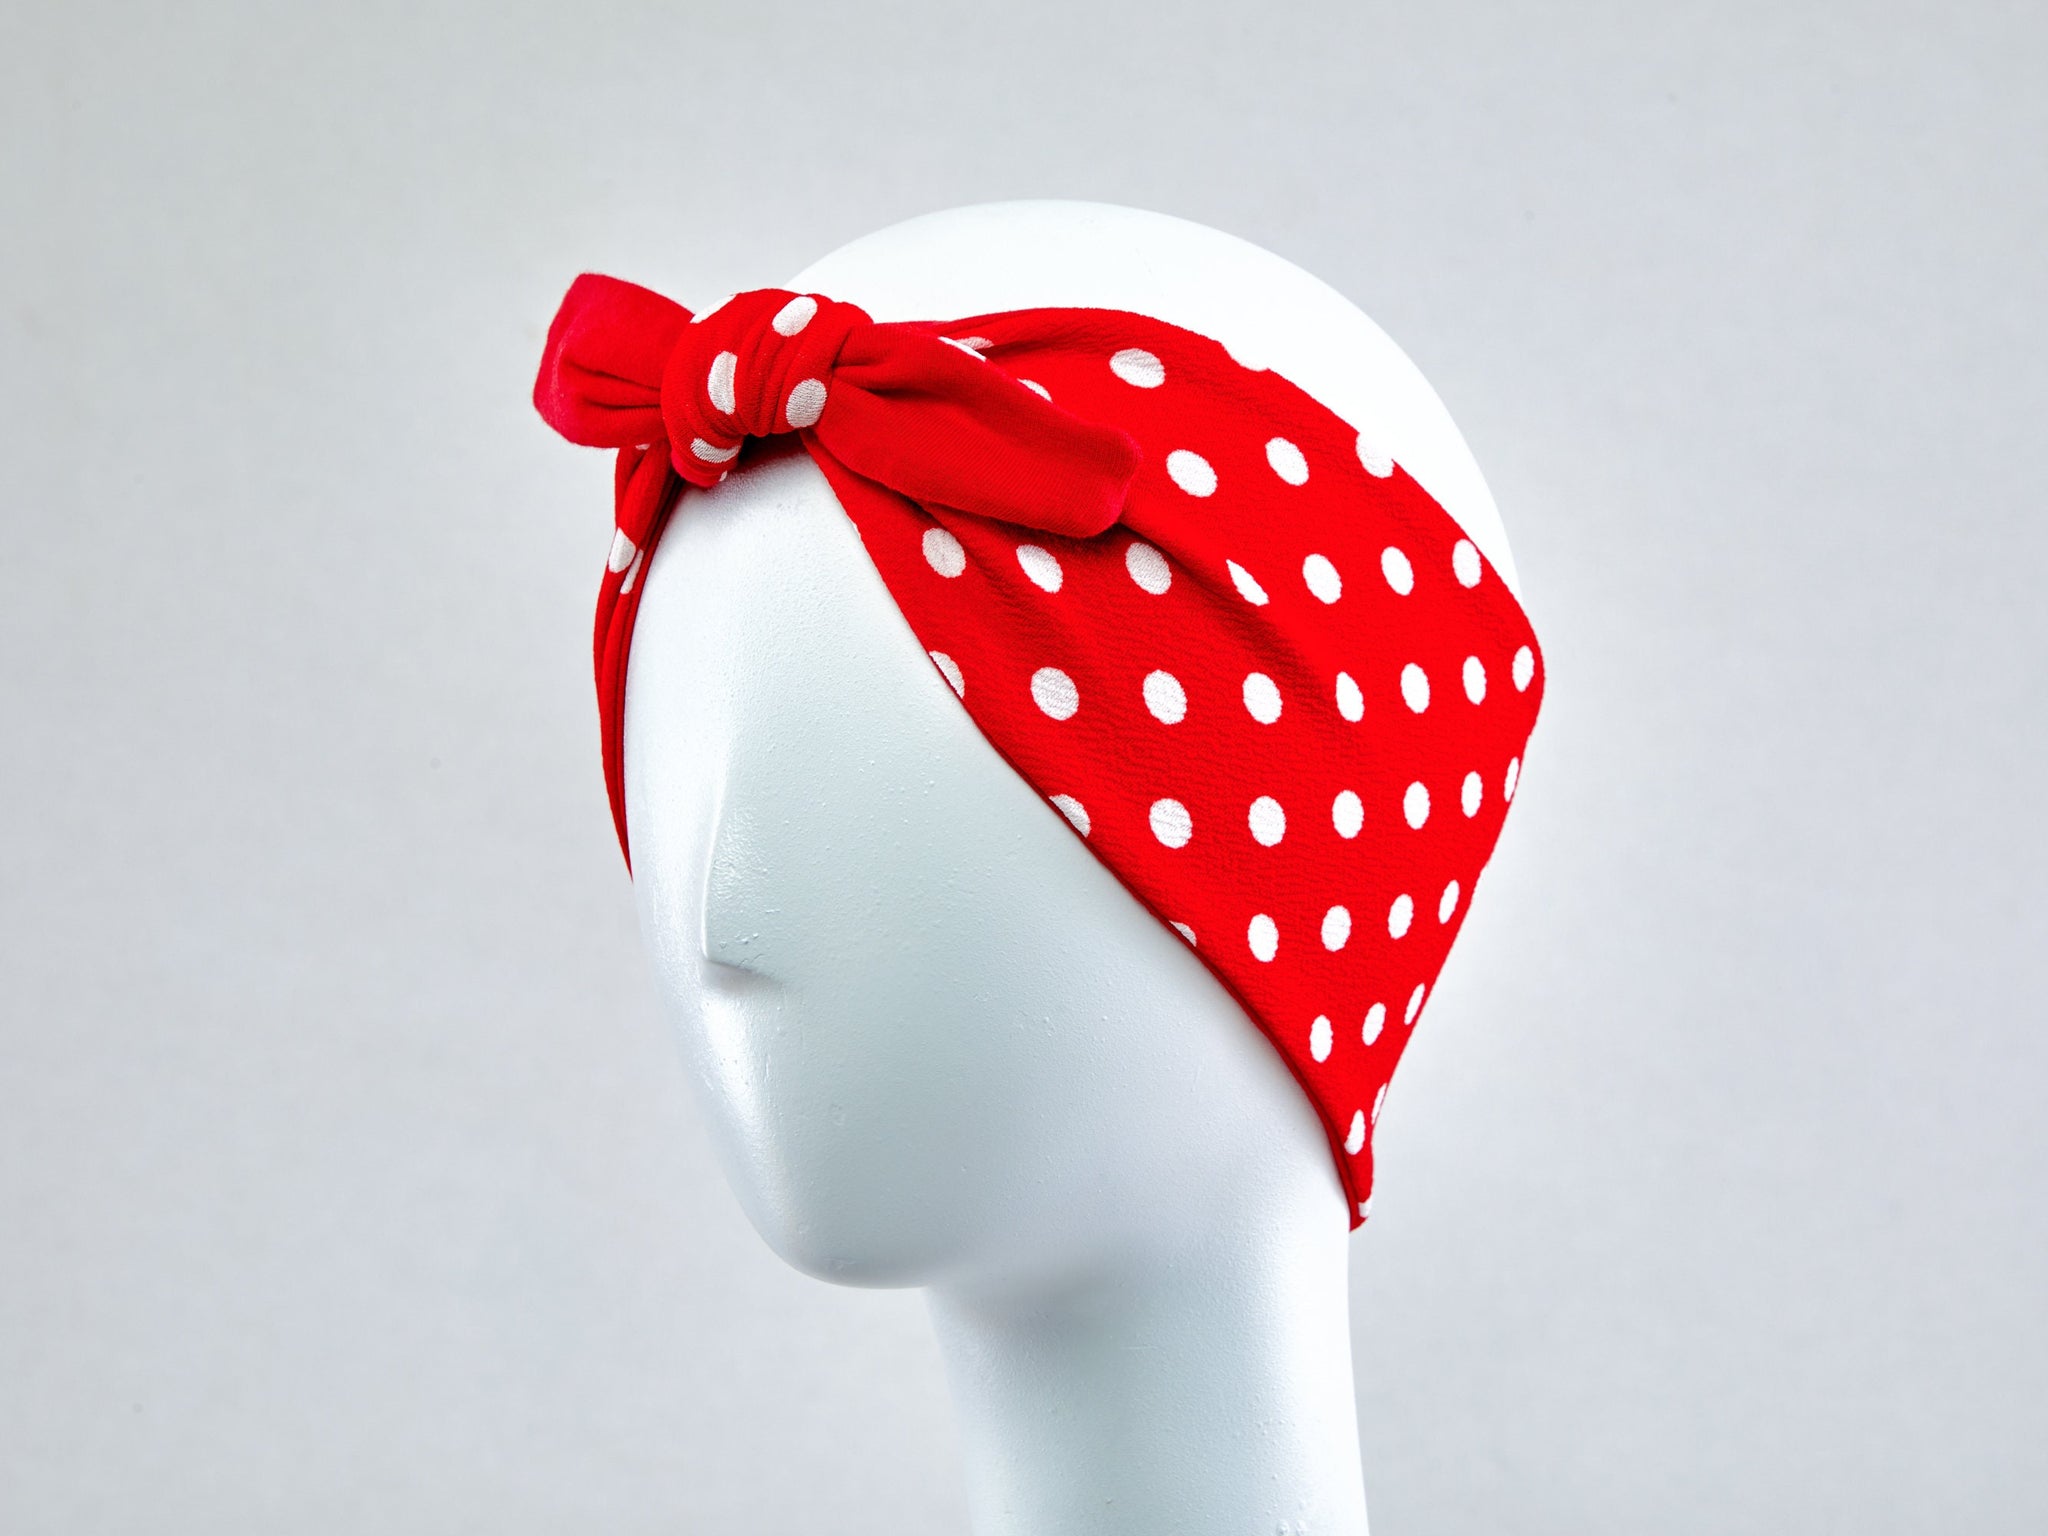 Rockabilly Girl with Red Bandana • Art Print – Miss Fluff's Boutique